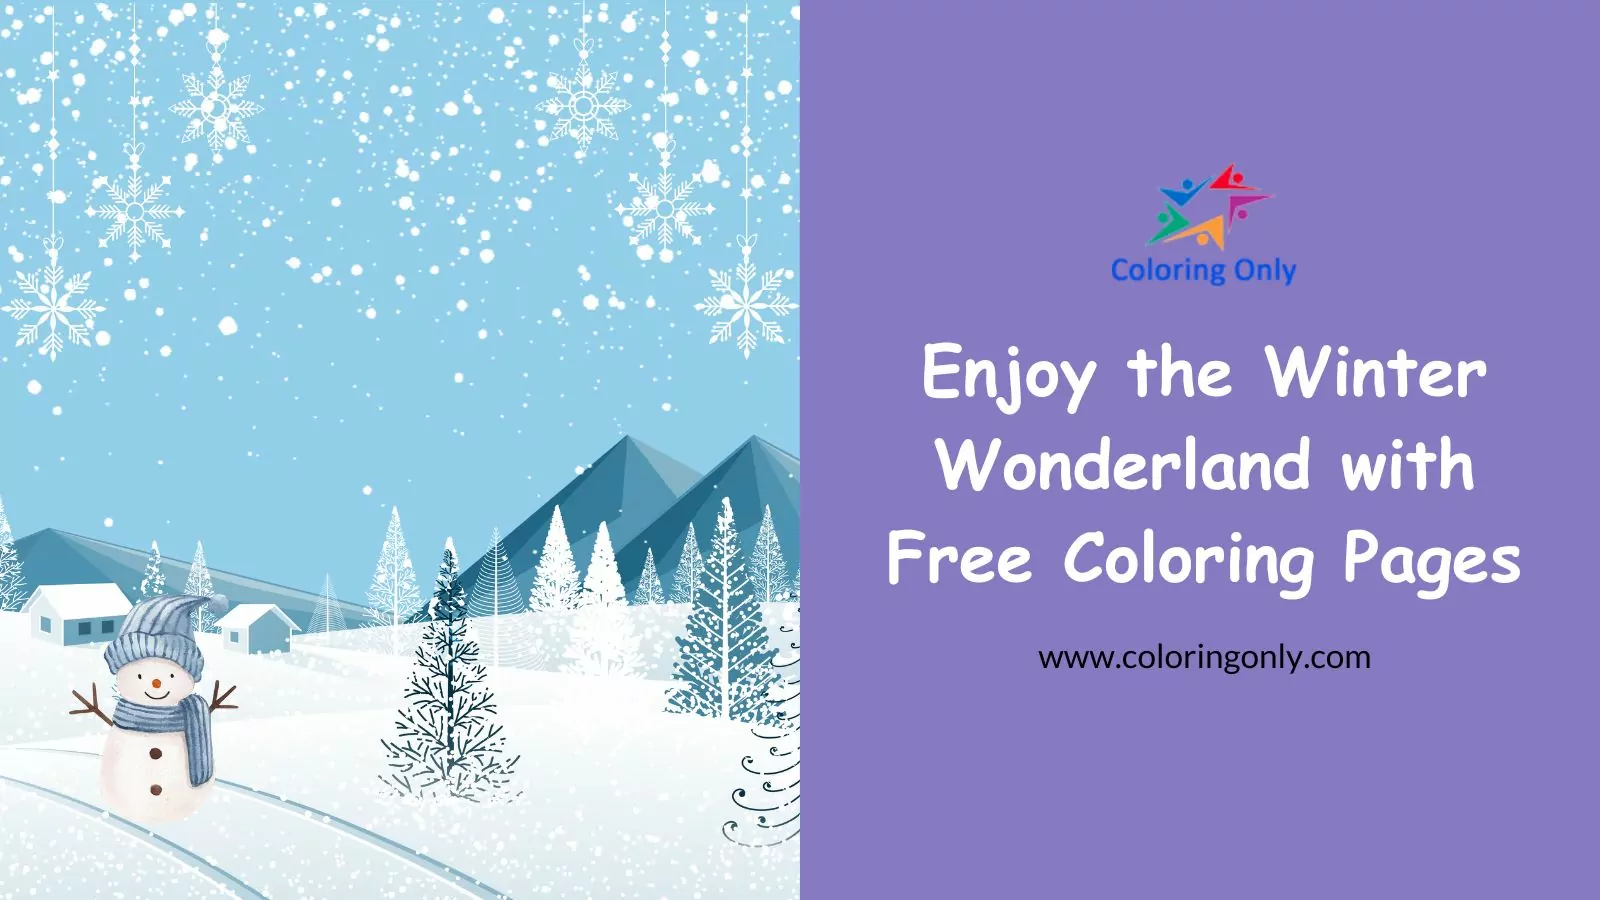 Enjoy the Winter Wonderland with Free Coloring Pages